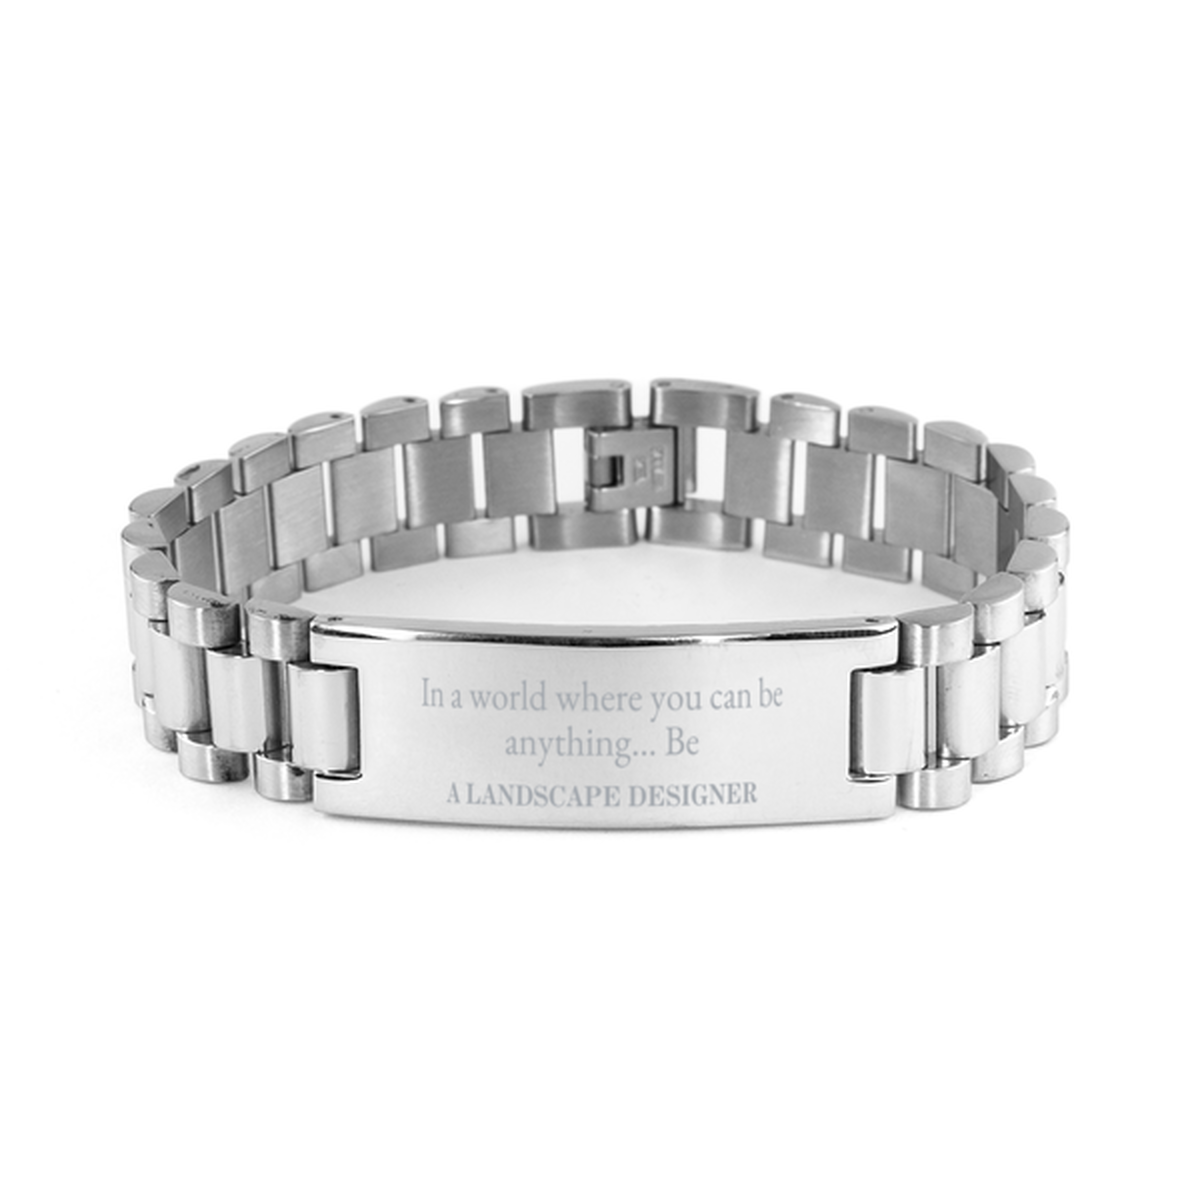 Gifts for Landscape Designer, In a world where you can be anything, Appreciation Birthday Ladder Stainless Steel Bracelet for Men, Women, Friends, Coworkers